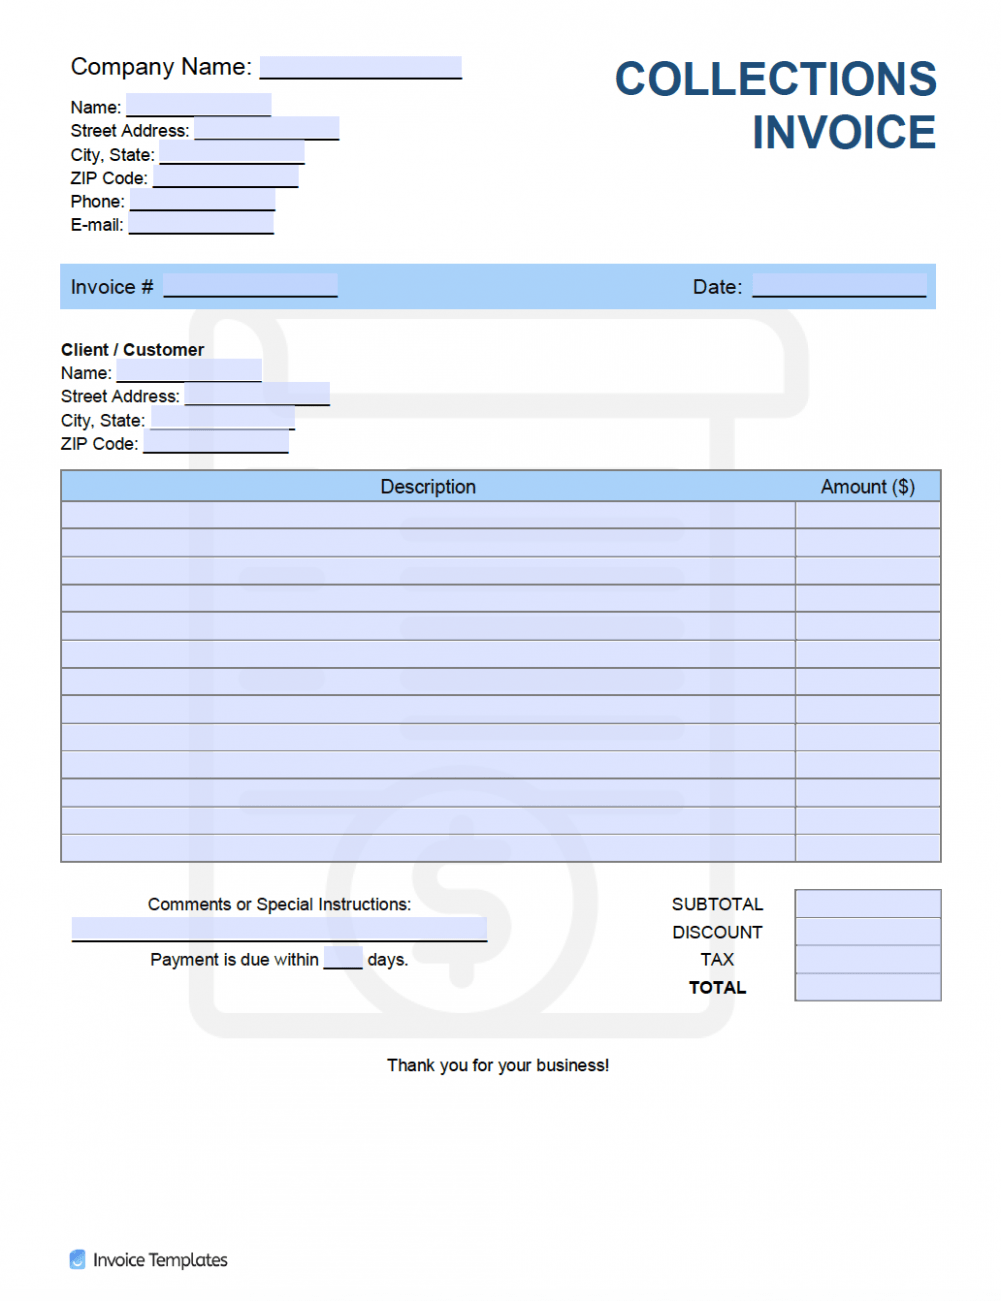 Editable Collection Invoice Template Excel